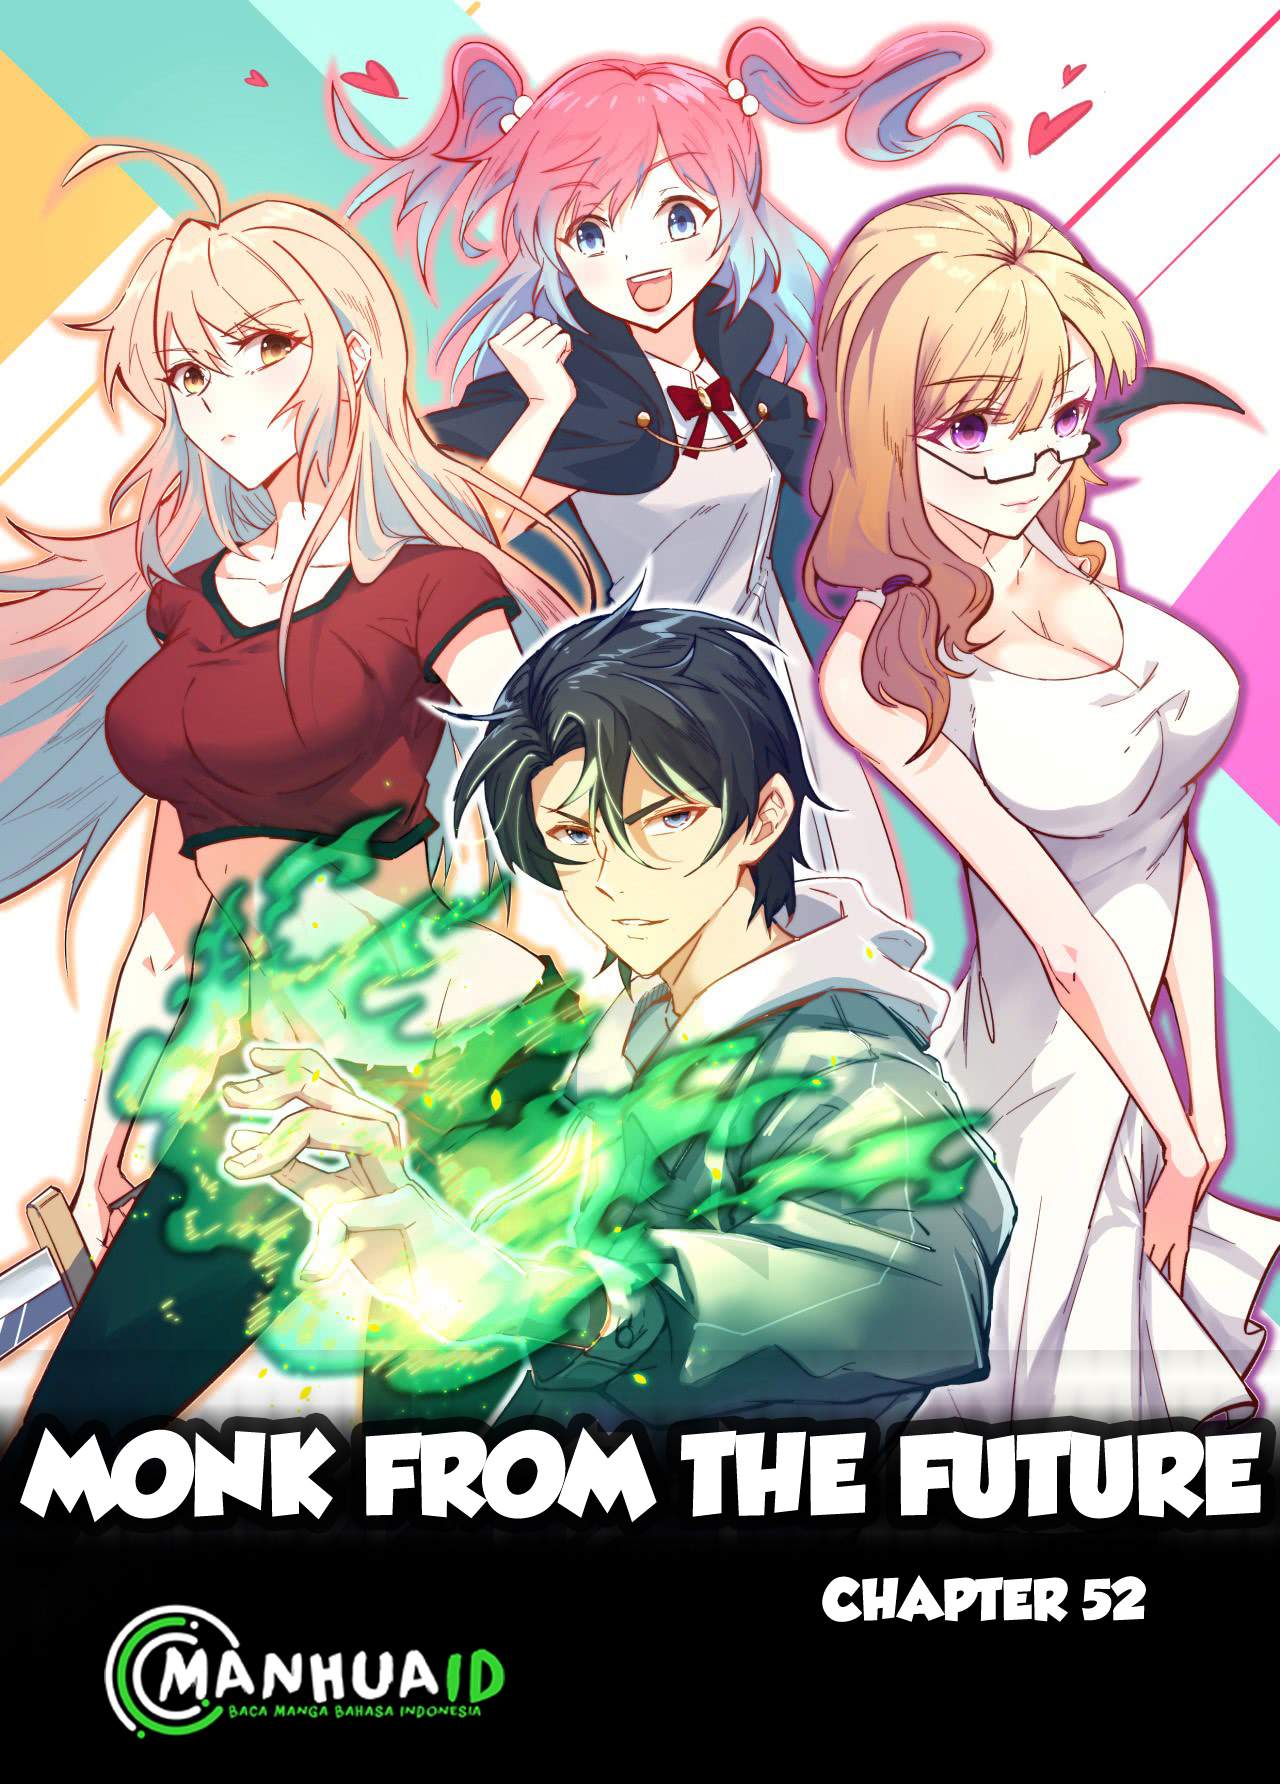 Monk From the Future Chapter 52